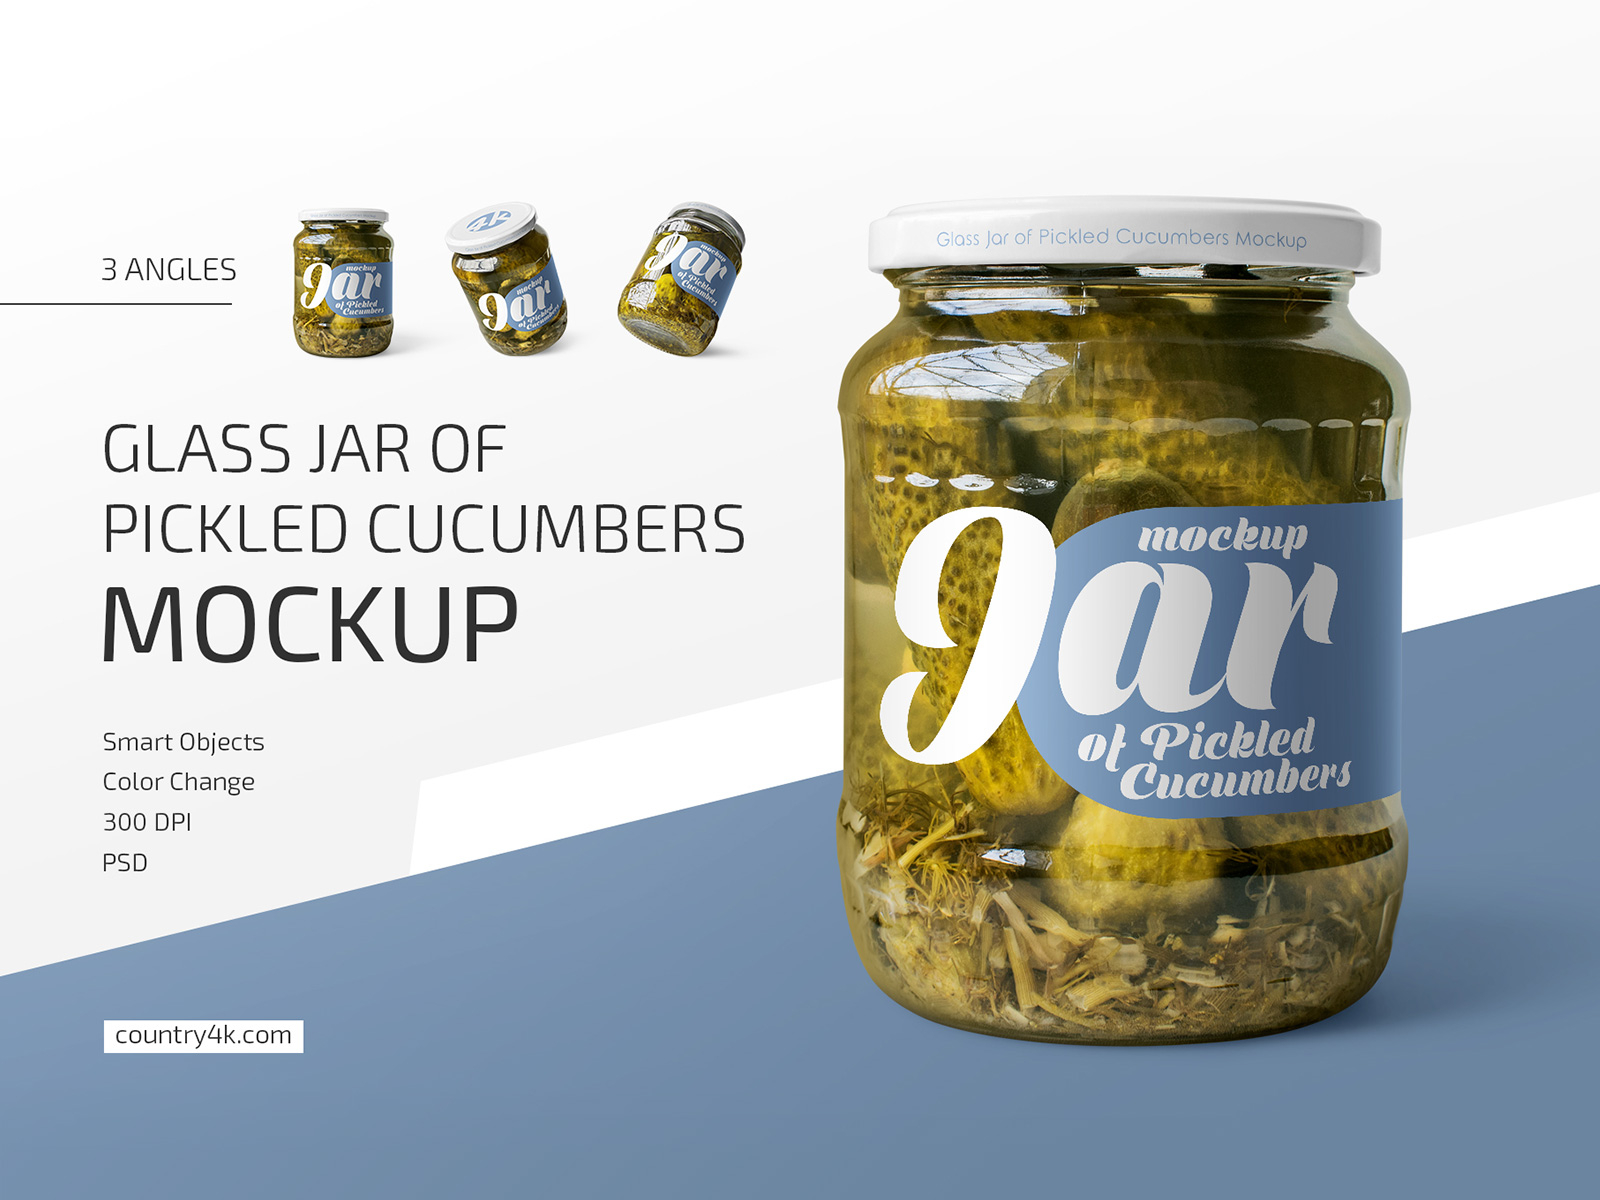 Download Glass Jar of Pickled Cucumbers Mockup Set by Country4k on ...